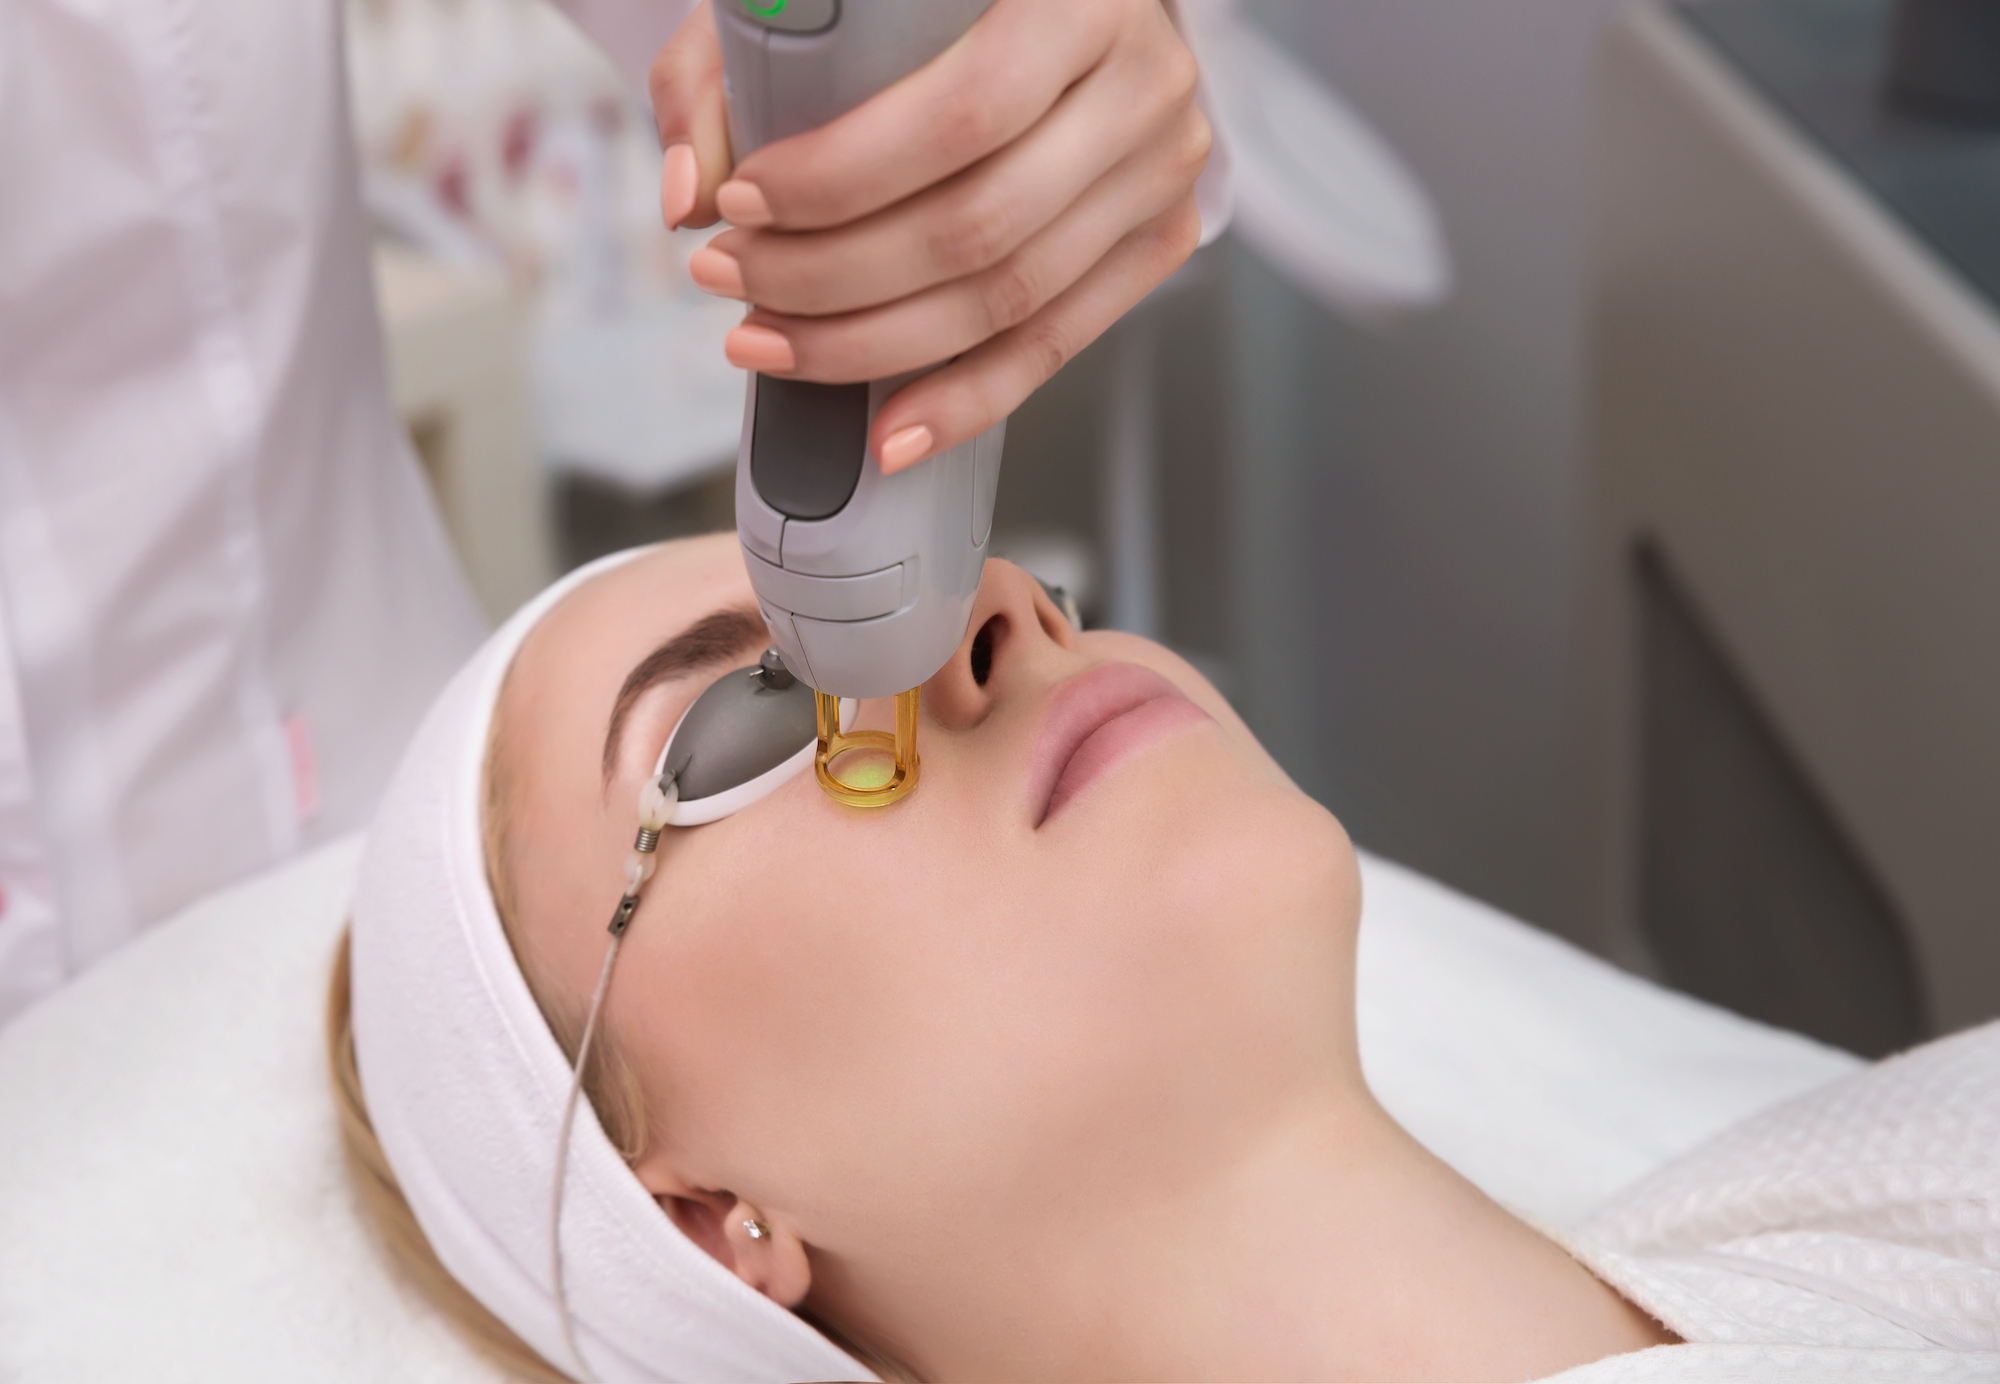 Therapist,Beautician,Makes,A,Laser,Treatment,To,Young,Woman's,Face